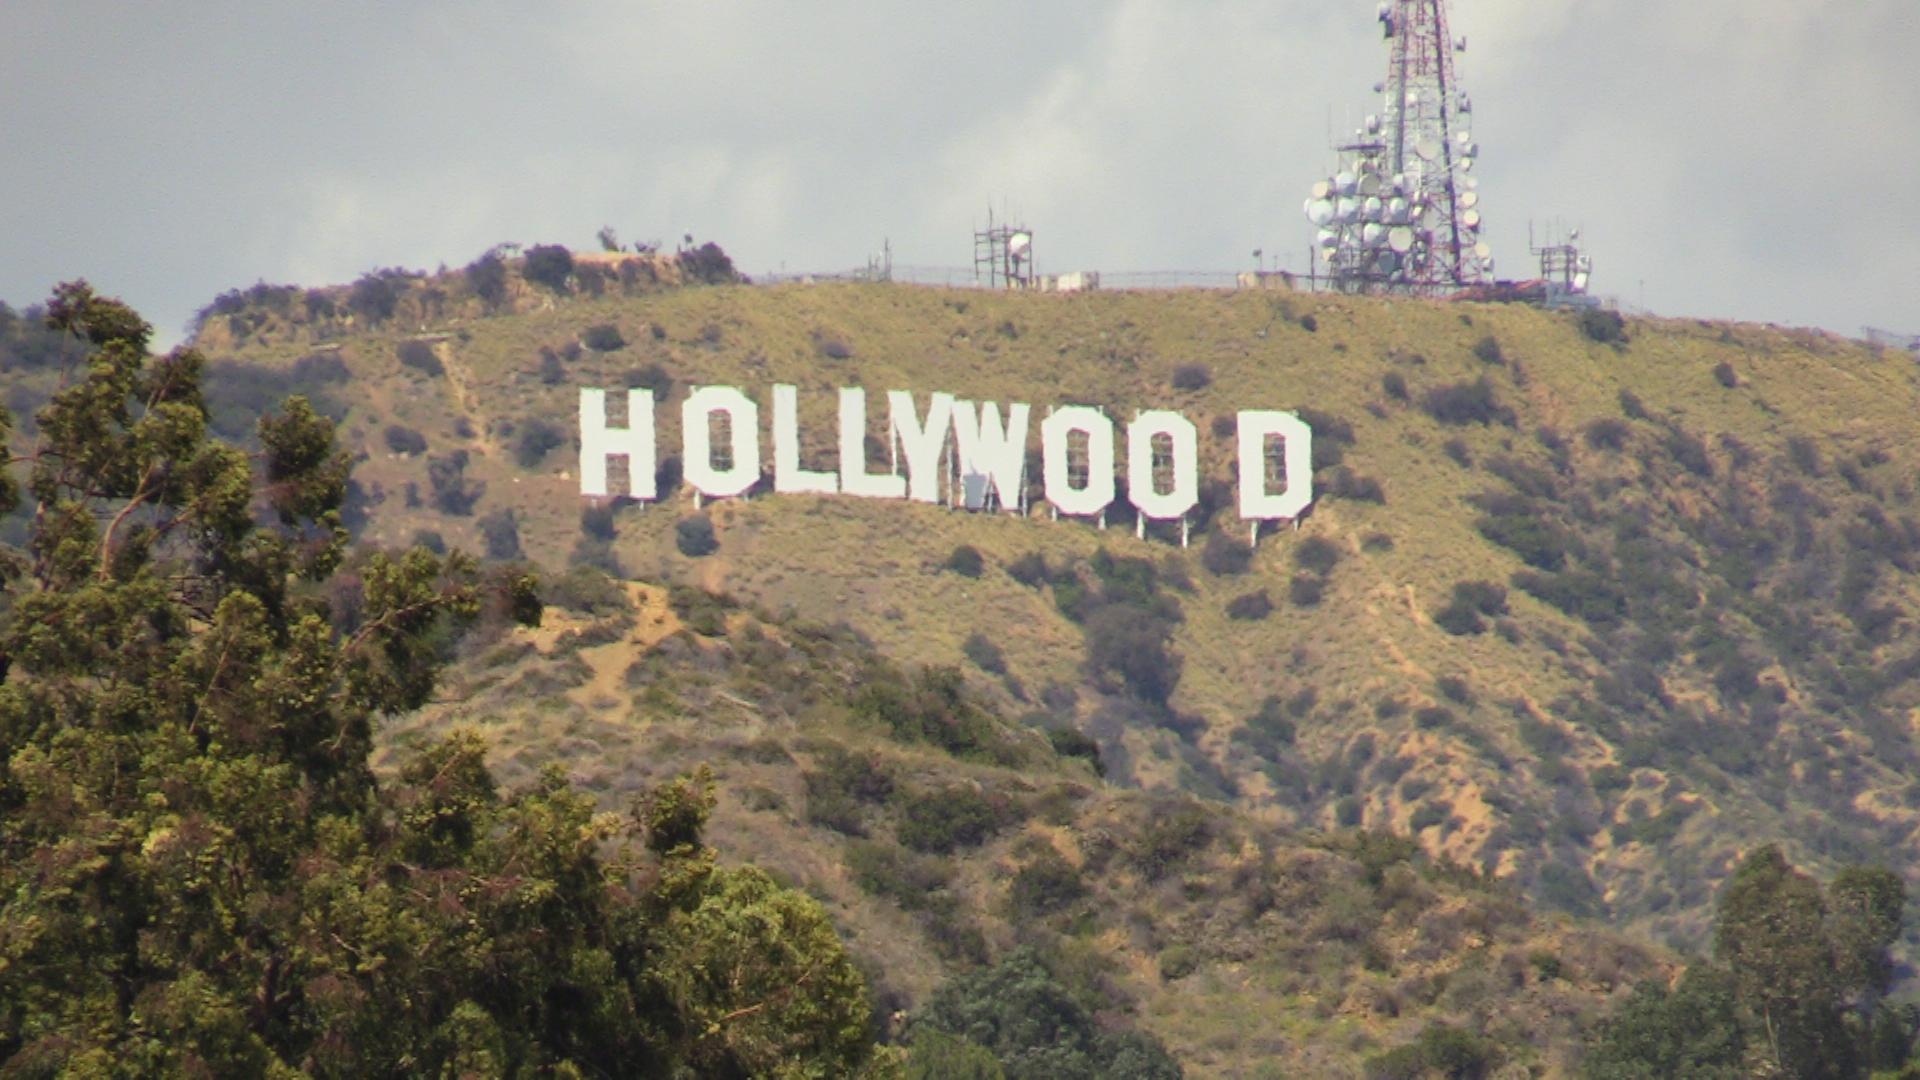 Los Angeles Celebrates 100th Year Anniversary of Hollywood Sign